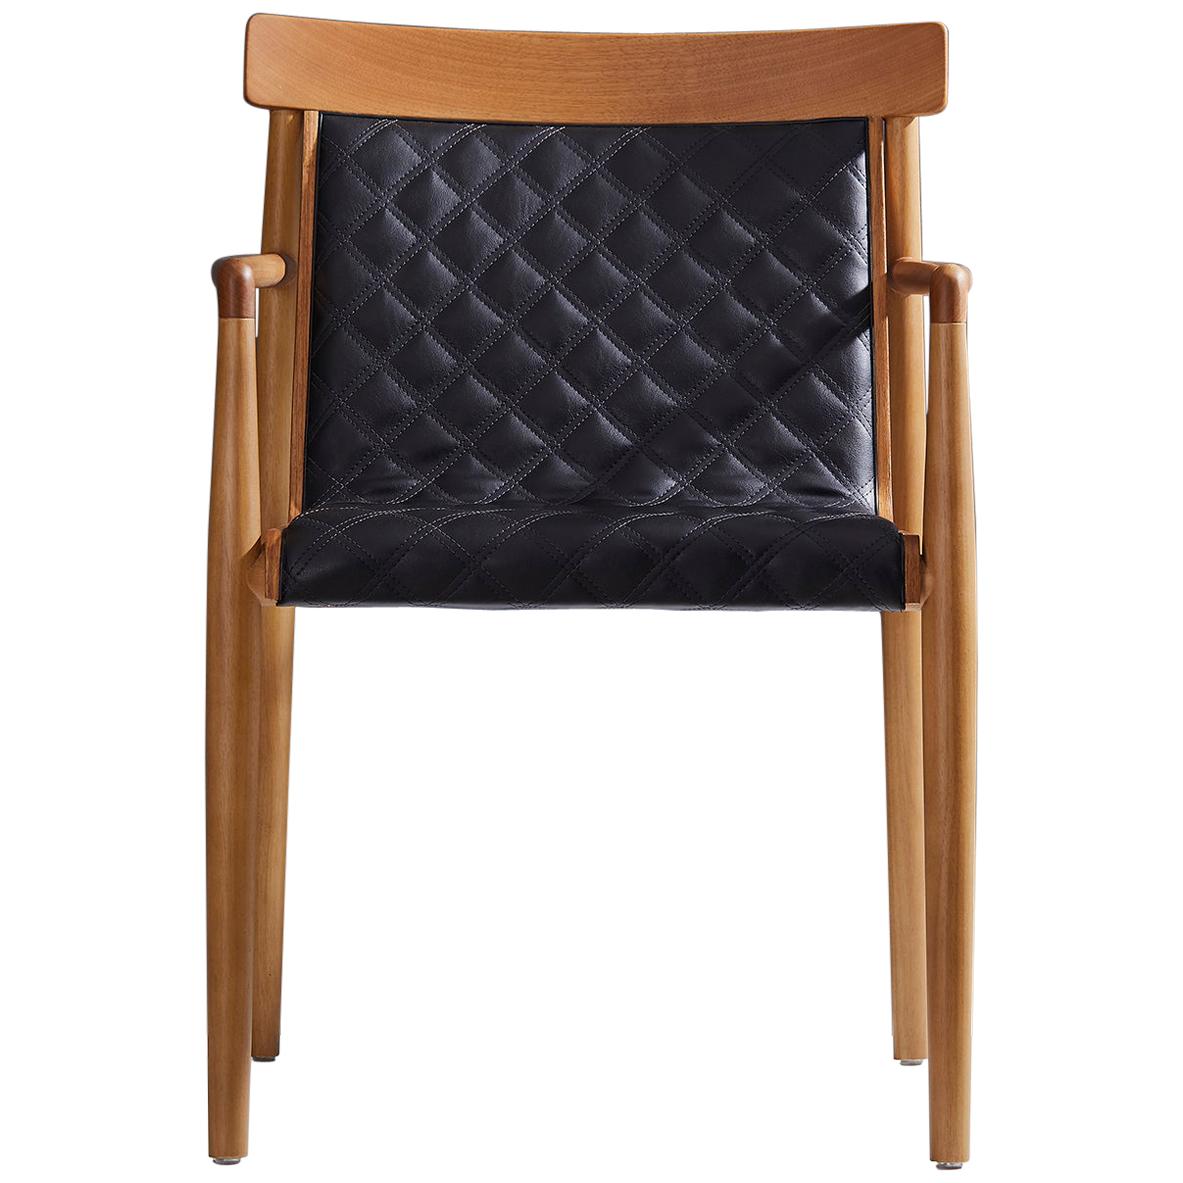 Contemporary Chair in Natural Solid Wood, Upholstered, Natural Wood Back, Arms